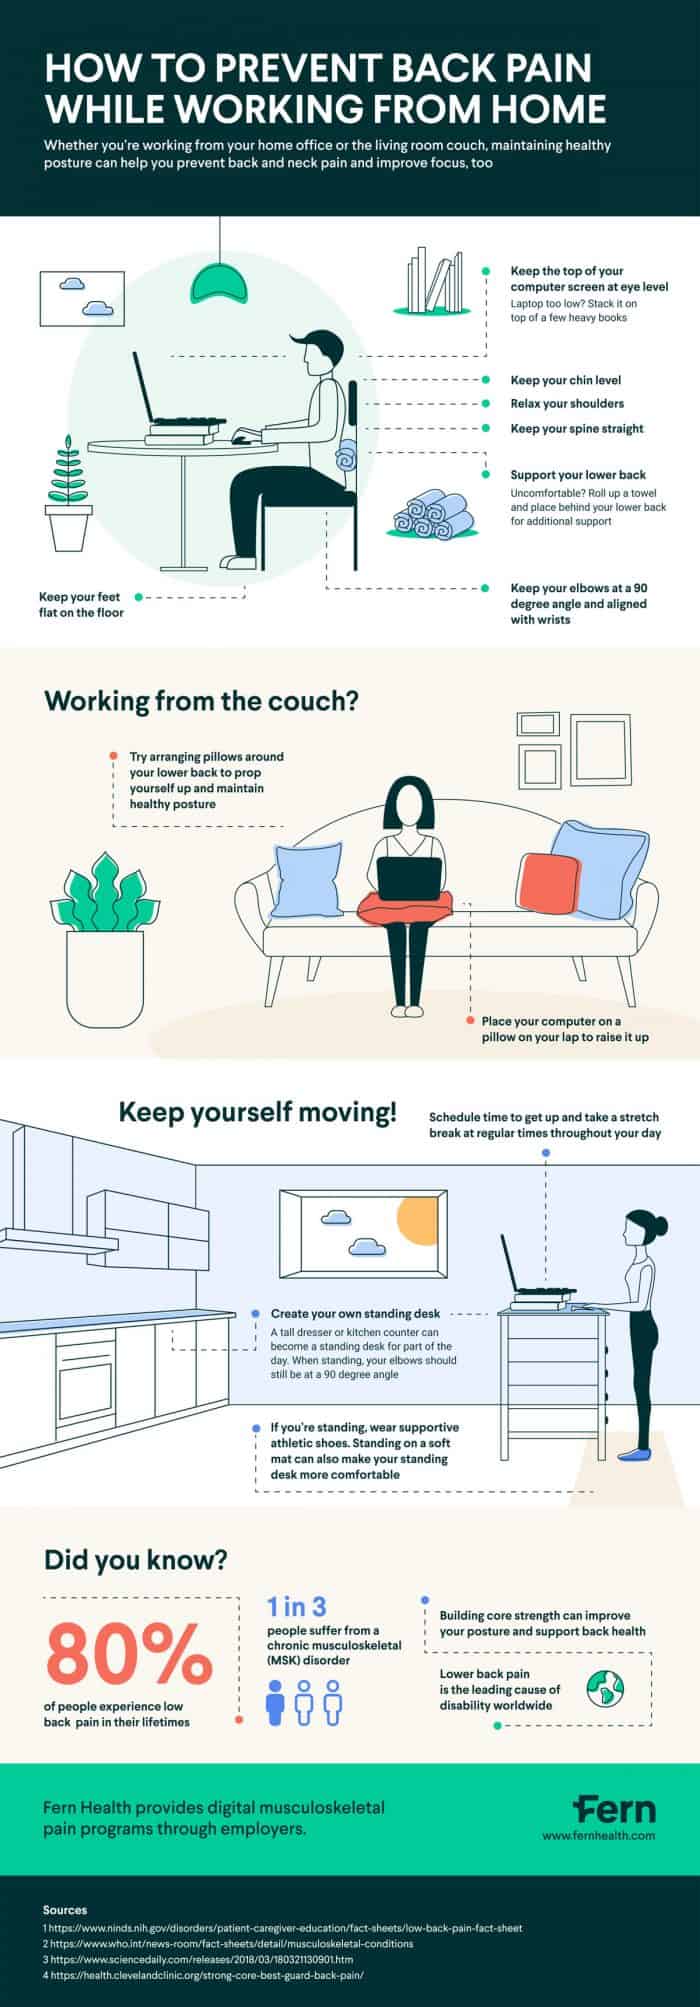 tips to prevent back pain while working from home